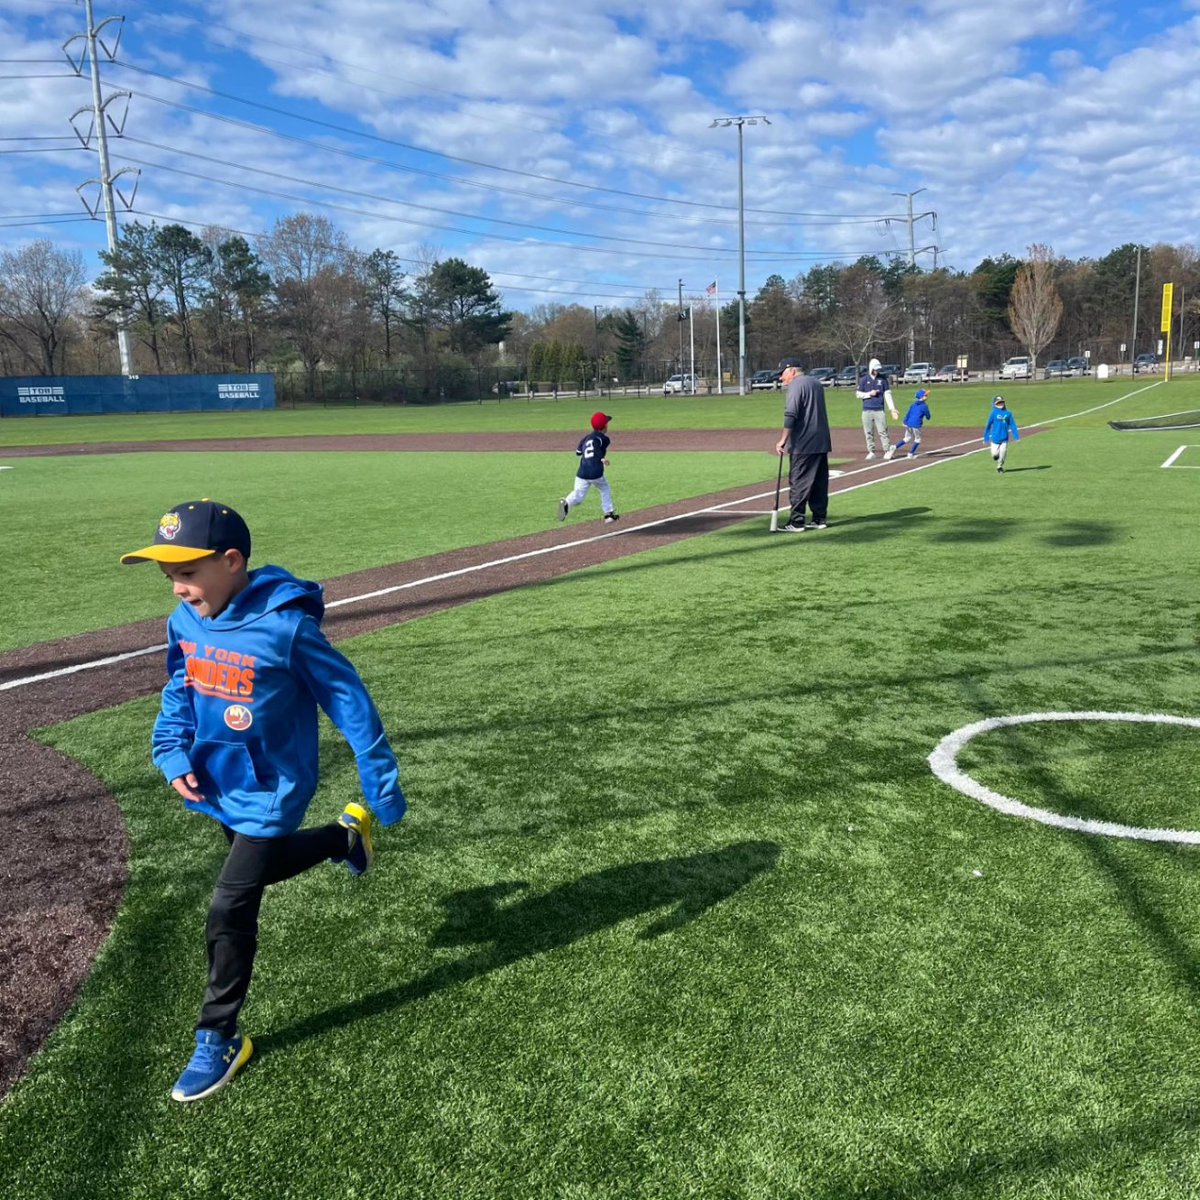 Our Spring Break Baseball Clinic was a huge success with 200 children ages 8 through 11 participating in our free clinic! Thank you kids for coming out and working hard! 
#baseball #youthsports #WeArePAL #notforprofit